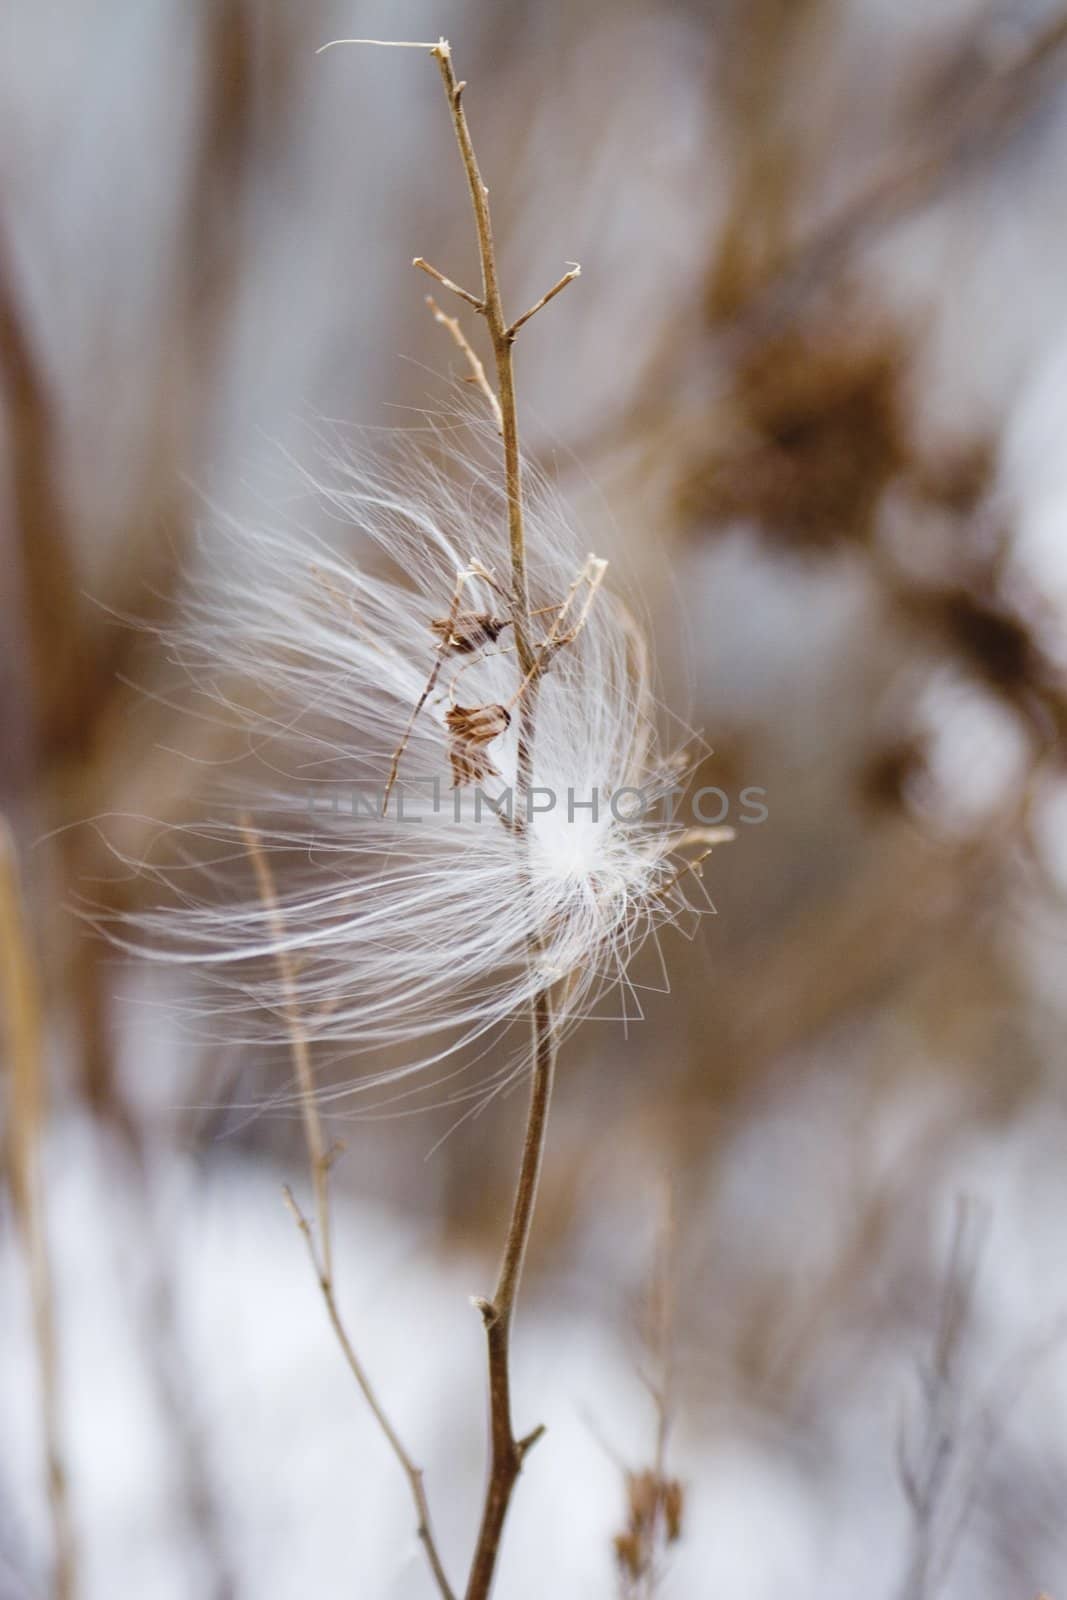 Seed caught in dried branch during winter